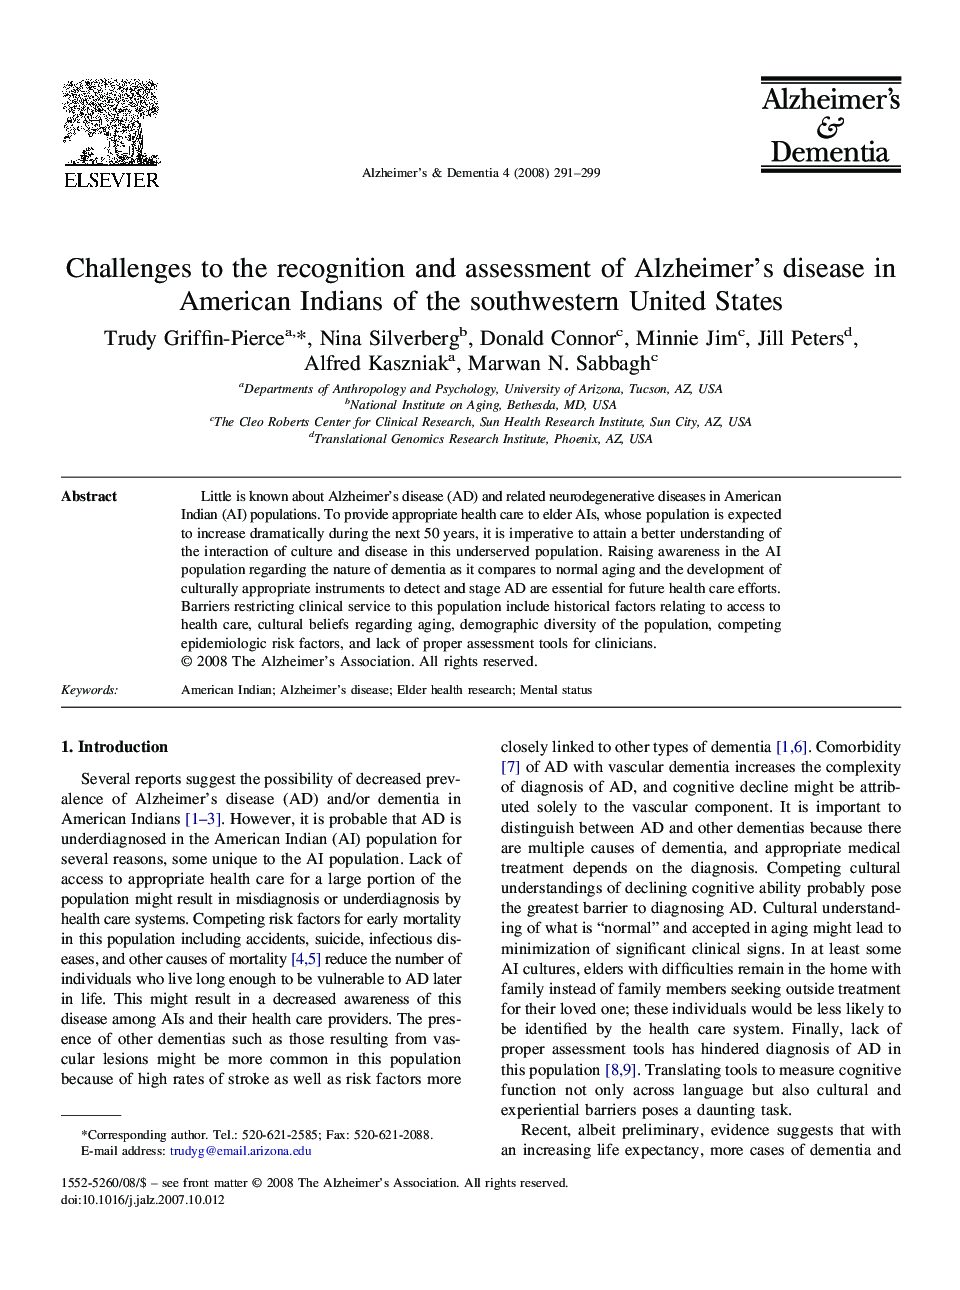 Challenges to the recognition and assessment of Alzheimer's disease in American Indians of the southwestern United States